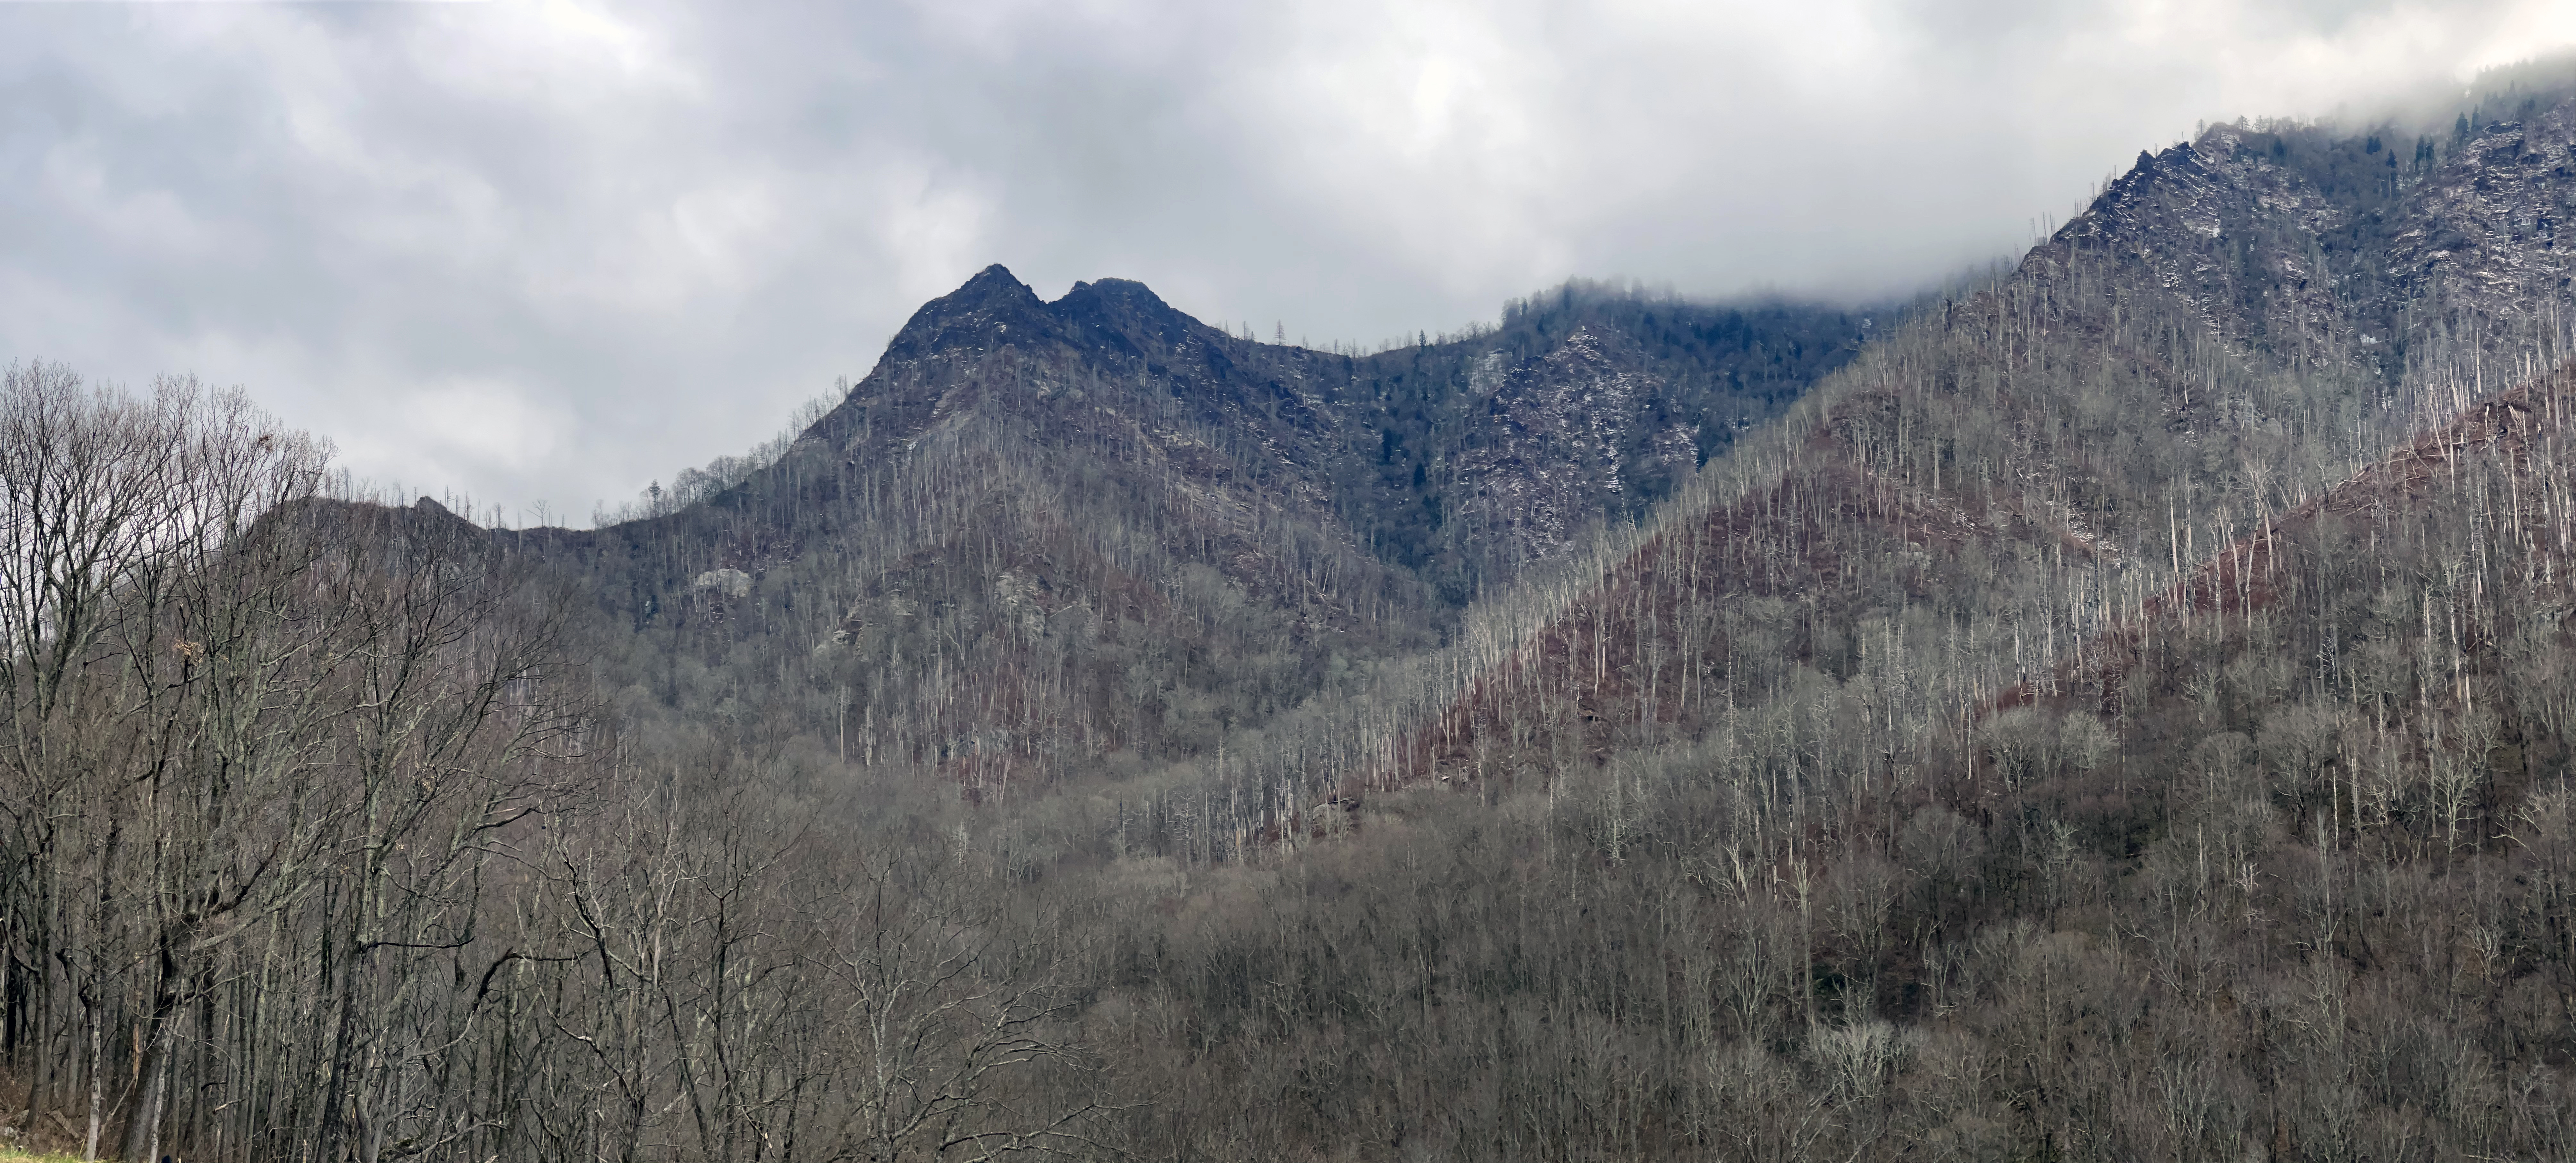 Chimney-Tops-Overlook-Great-Smoky-Mountains-National-Park.jpg